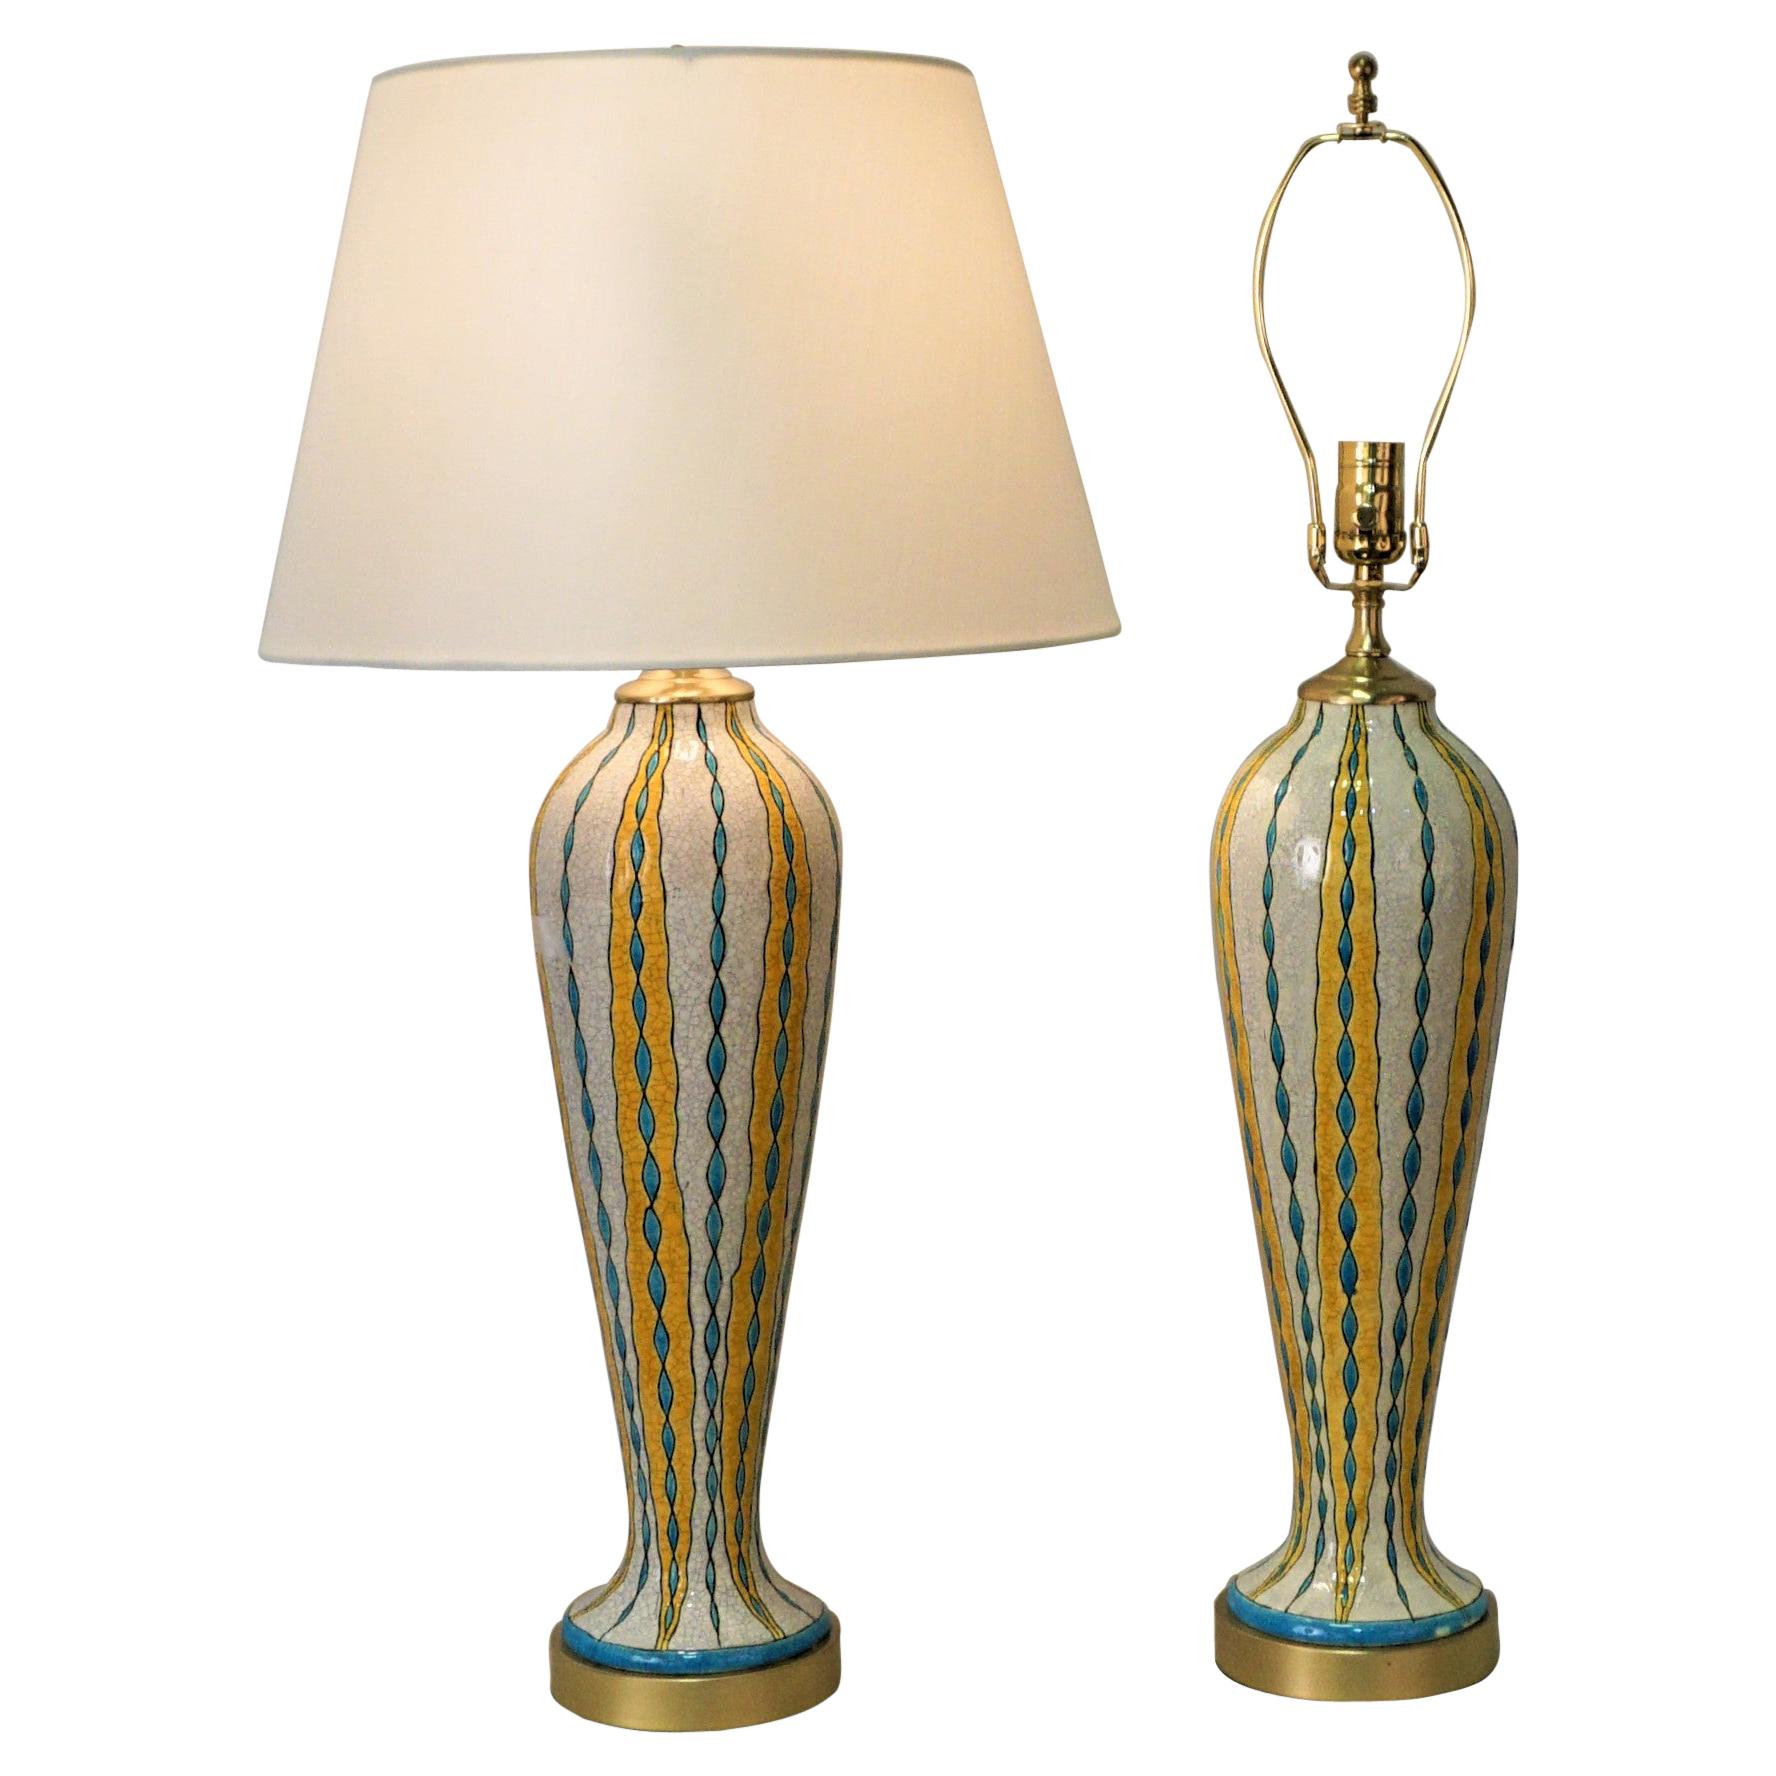 Pair of Electrified Lamps Keramis Art Deco vase by Charles Catteau for Boch